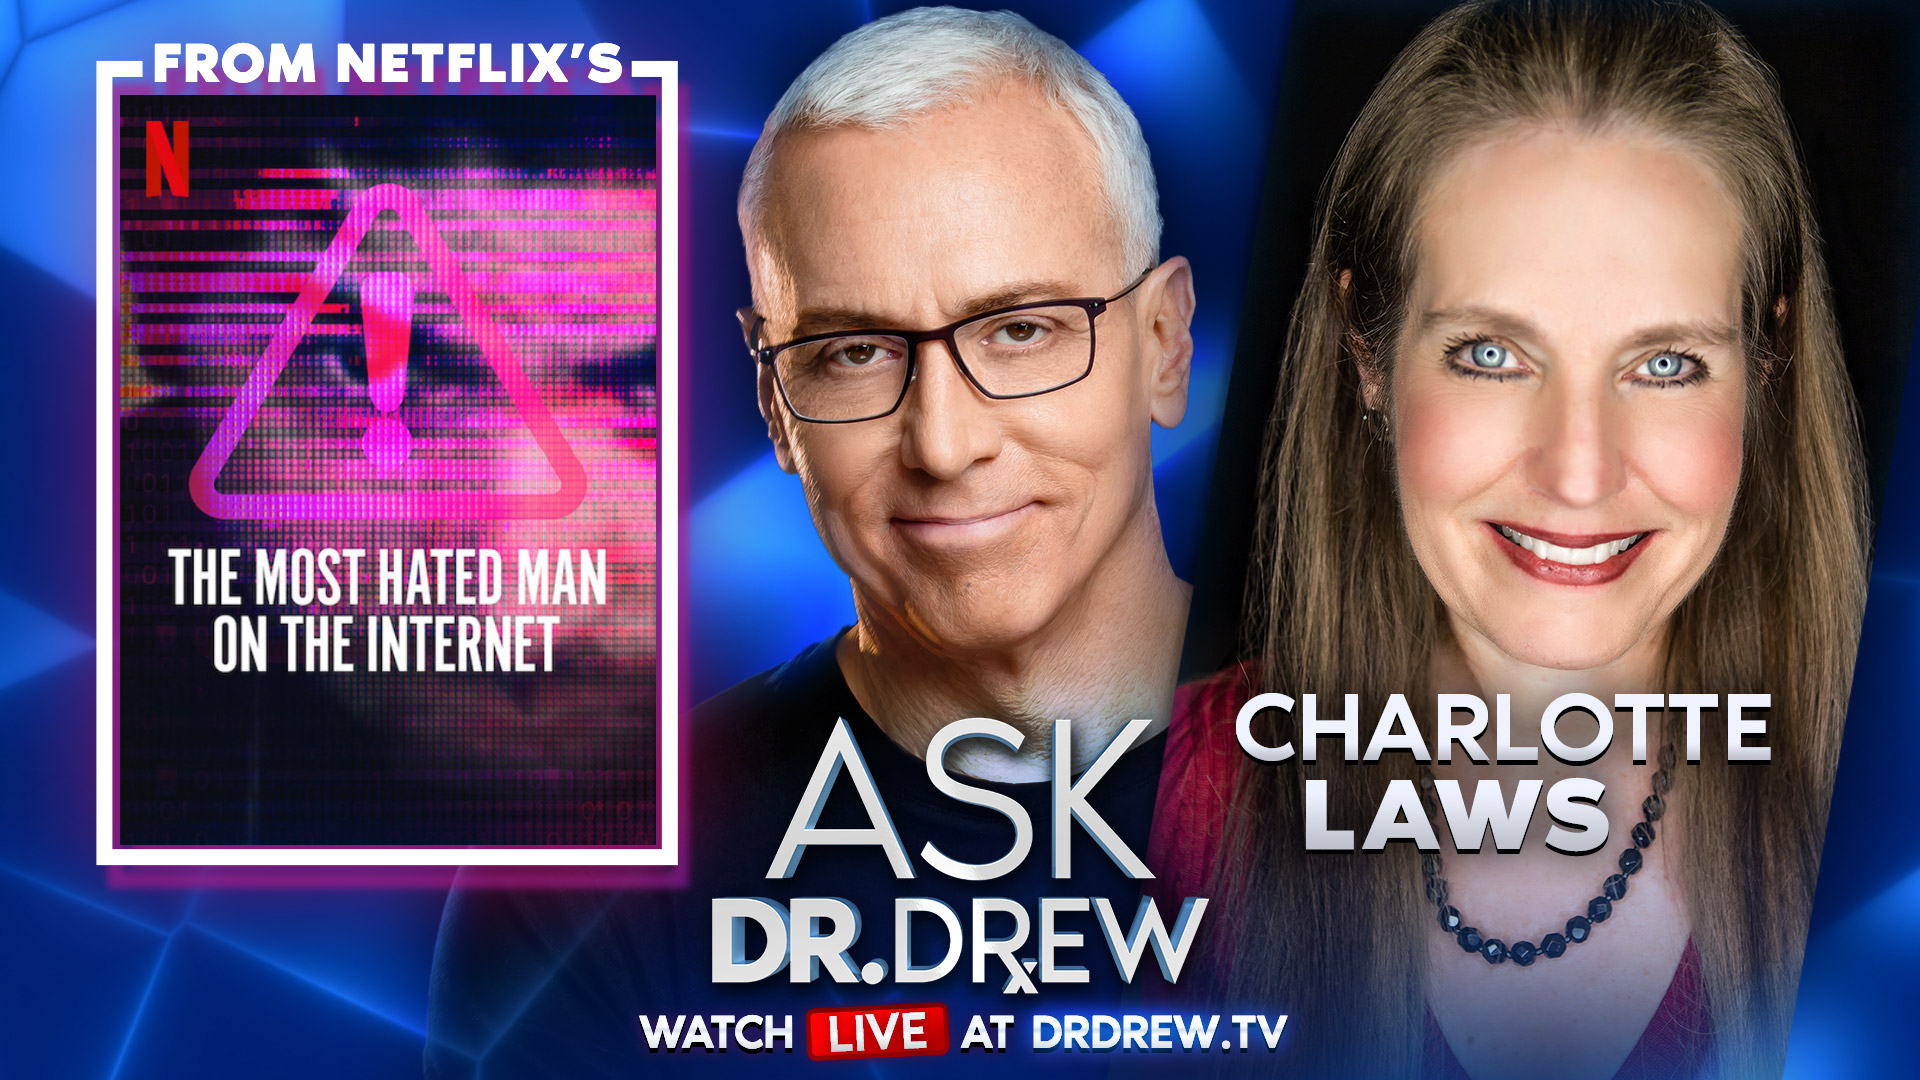 Charlotte Laws (from Netflix's "The Most Hated Man On The Internet") on Ask Dr. Drew in 2022